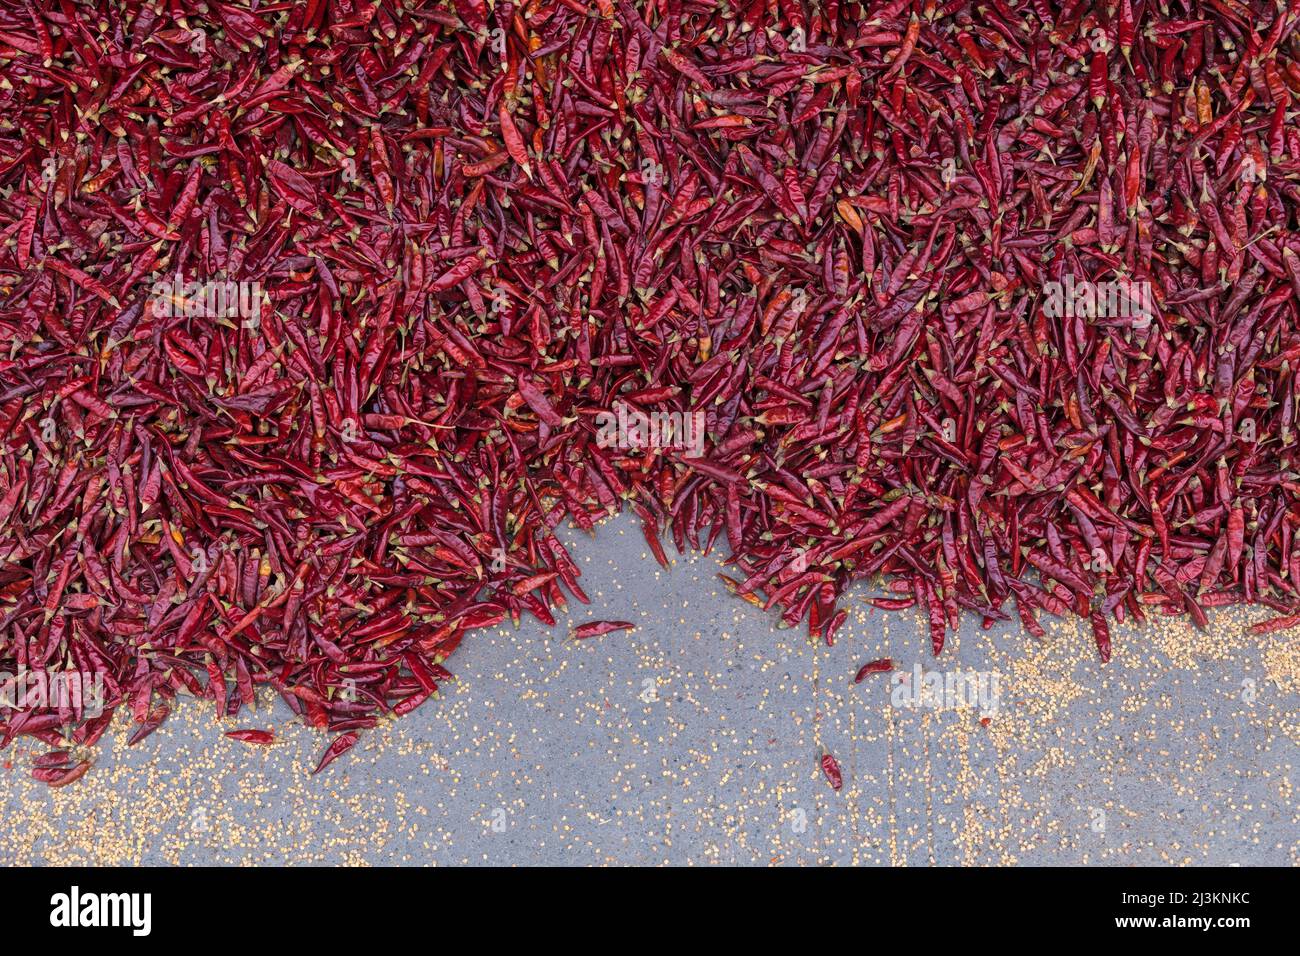 A pile of red chillies (Capsicum) for sale in Chengdu Market; Sichuan, China Stock Photo